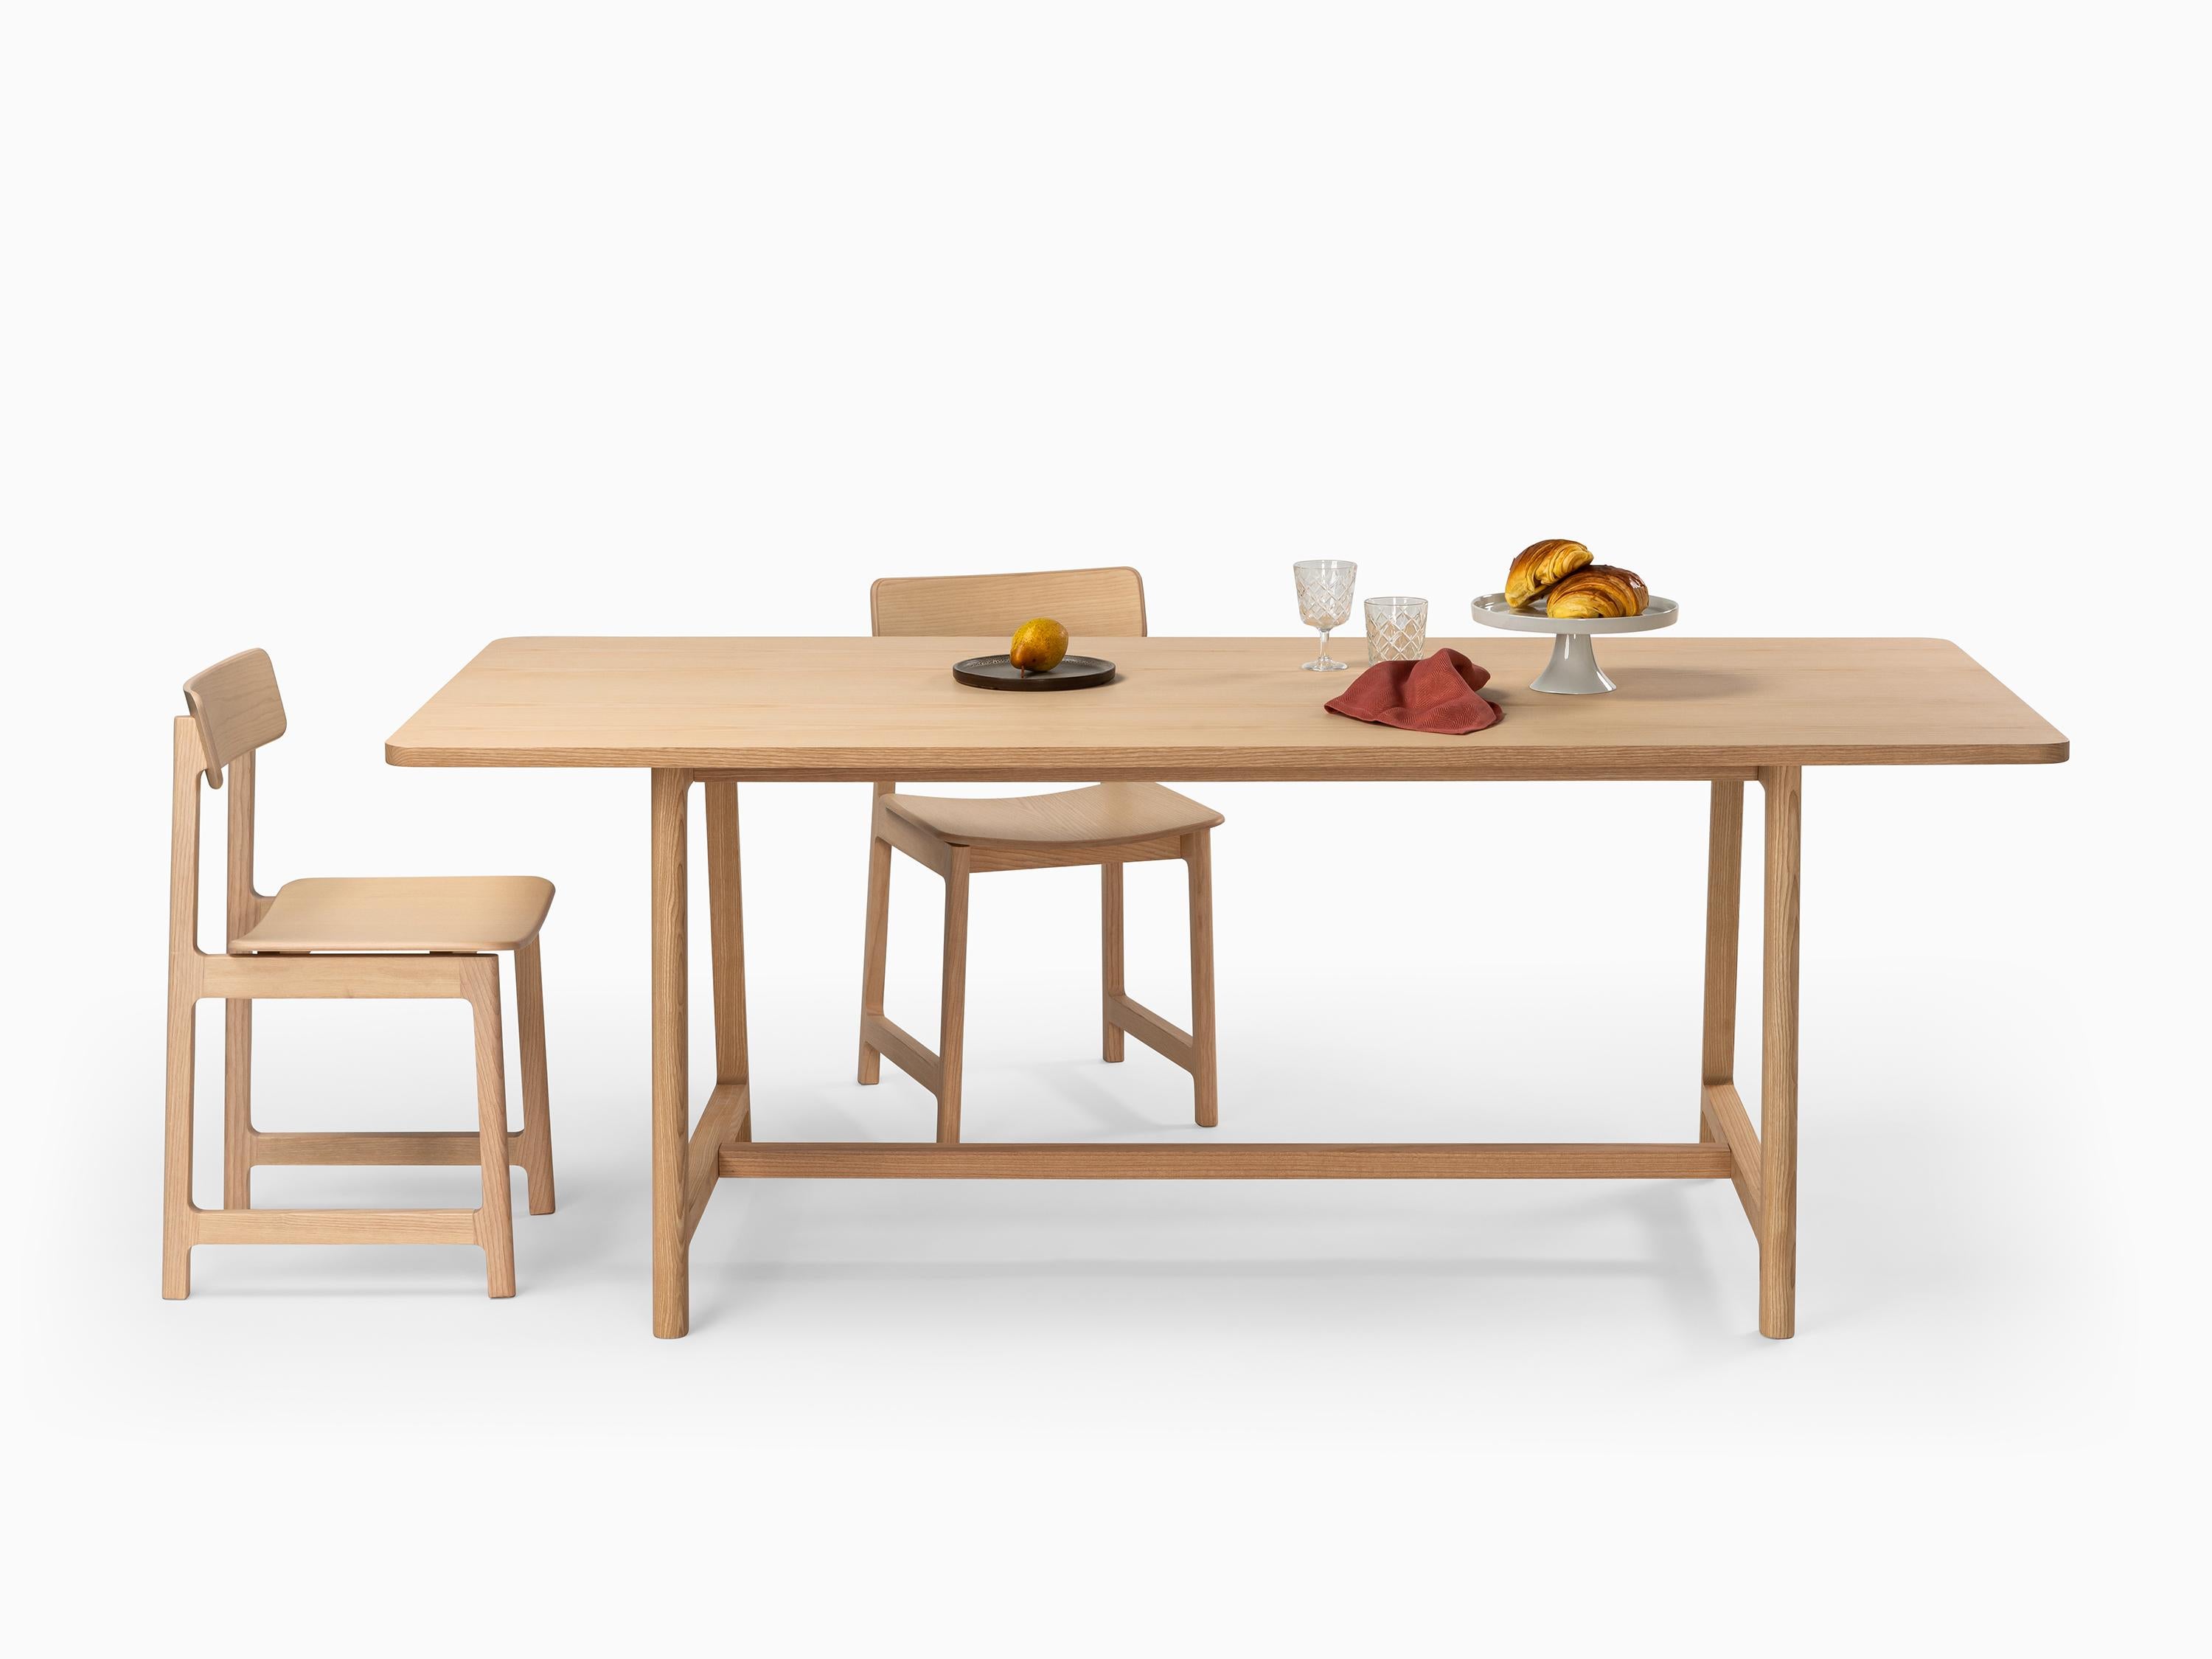 Machine-Made Minimalist Modern Table in Oak Wood FRAME Collection For Sale